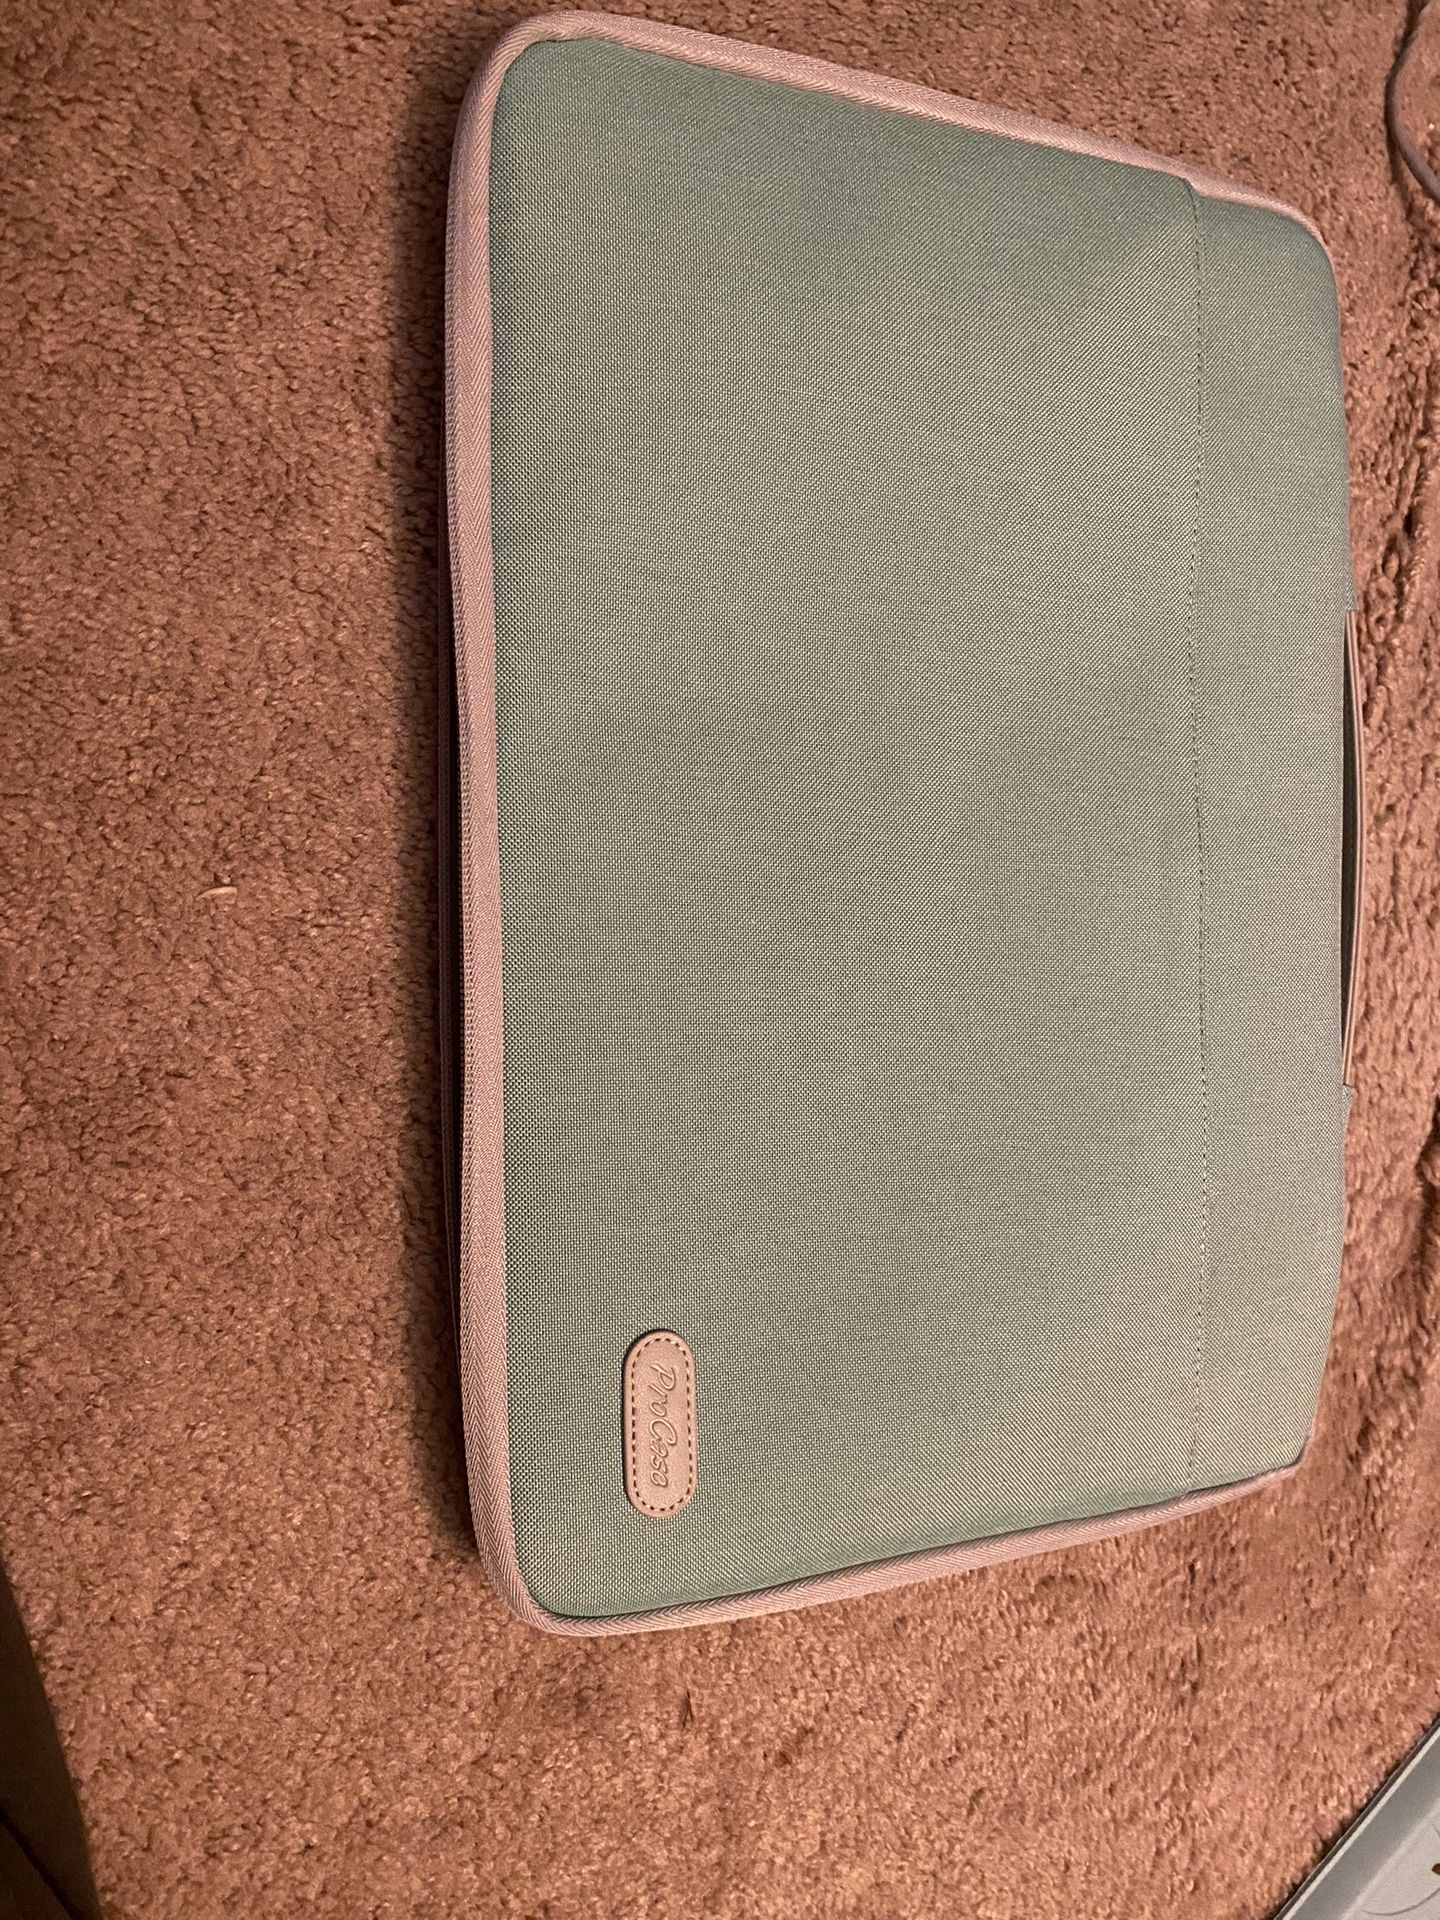 Chromebook Cover Case With Pockets